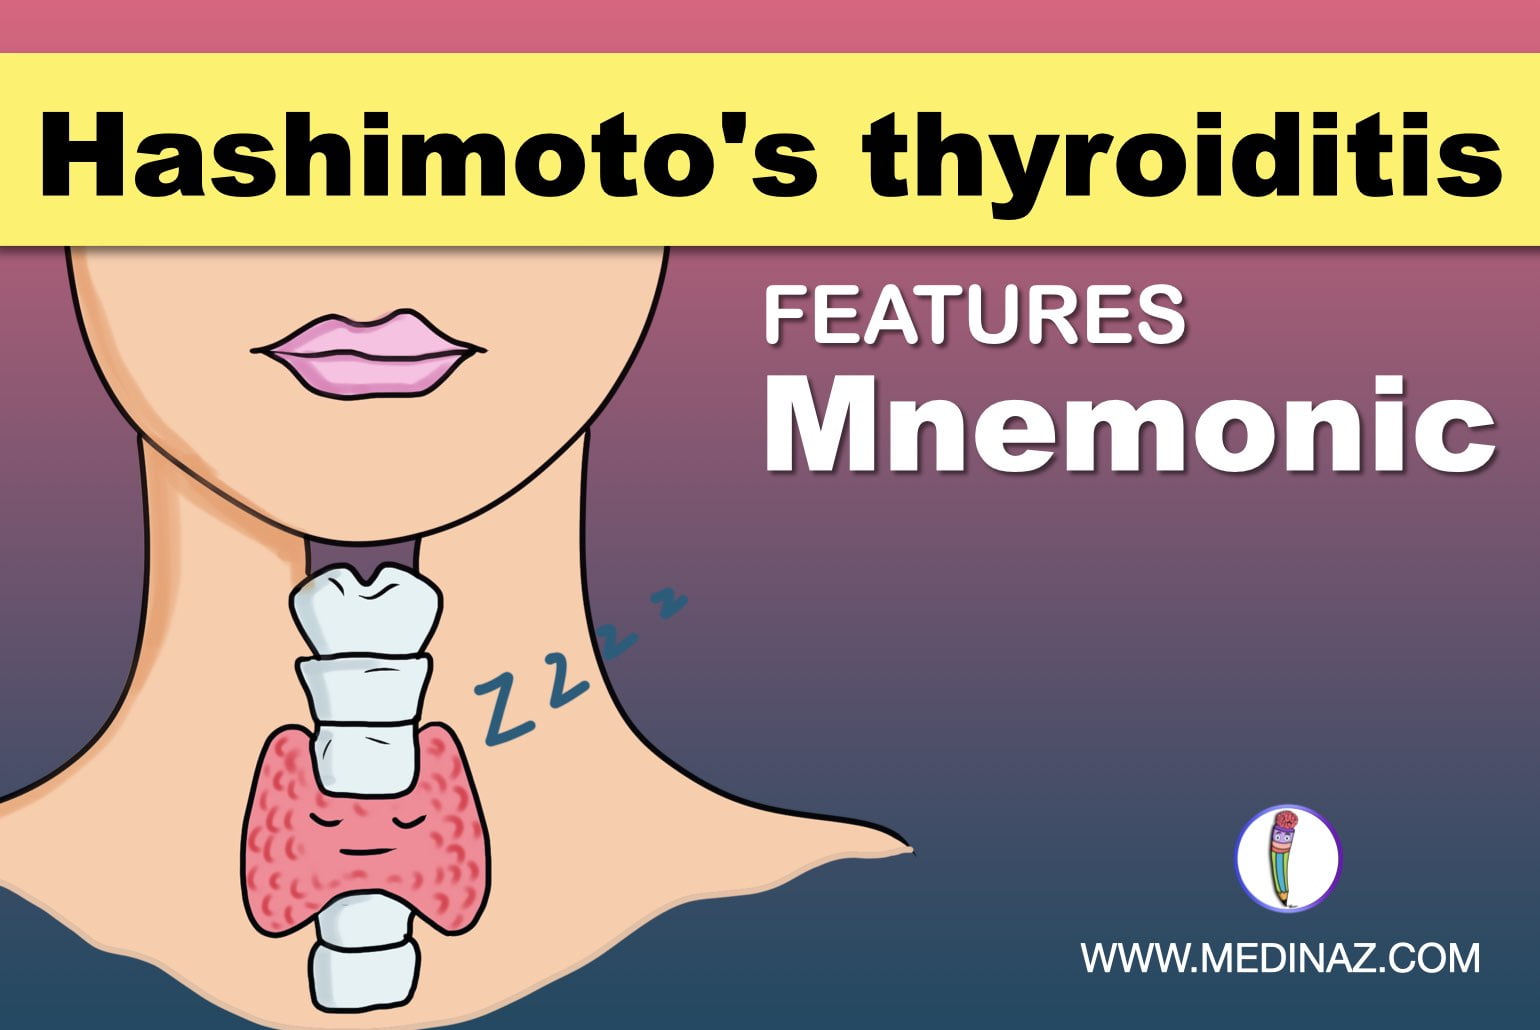 The image contains thyroid gland and write up Hashimoto's thyroiditis Mnemonic